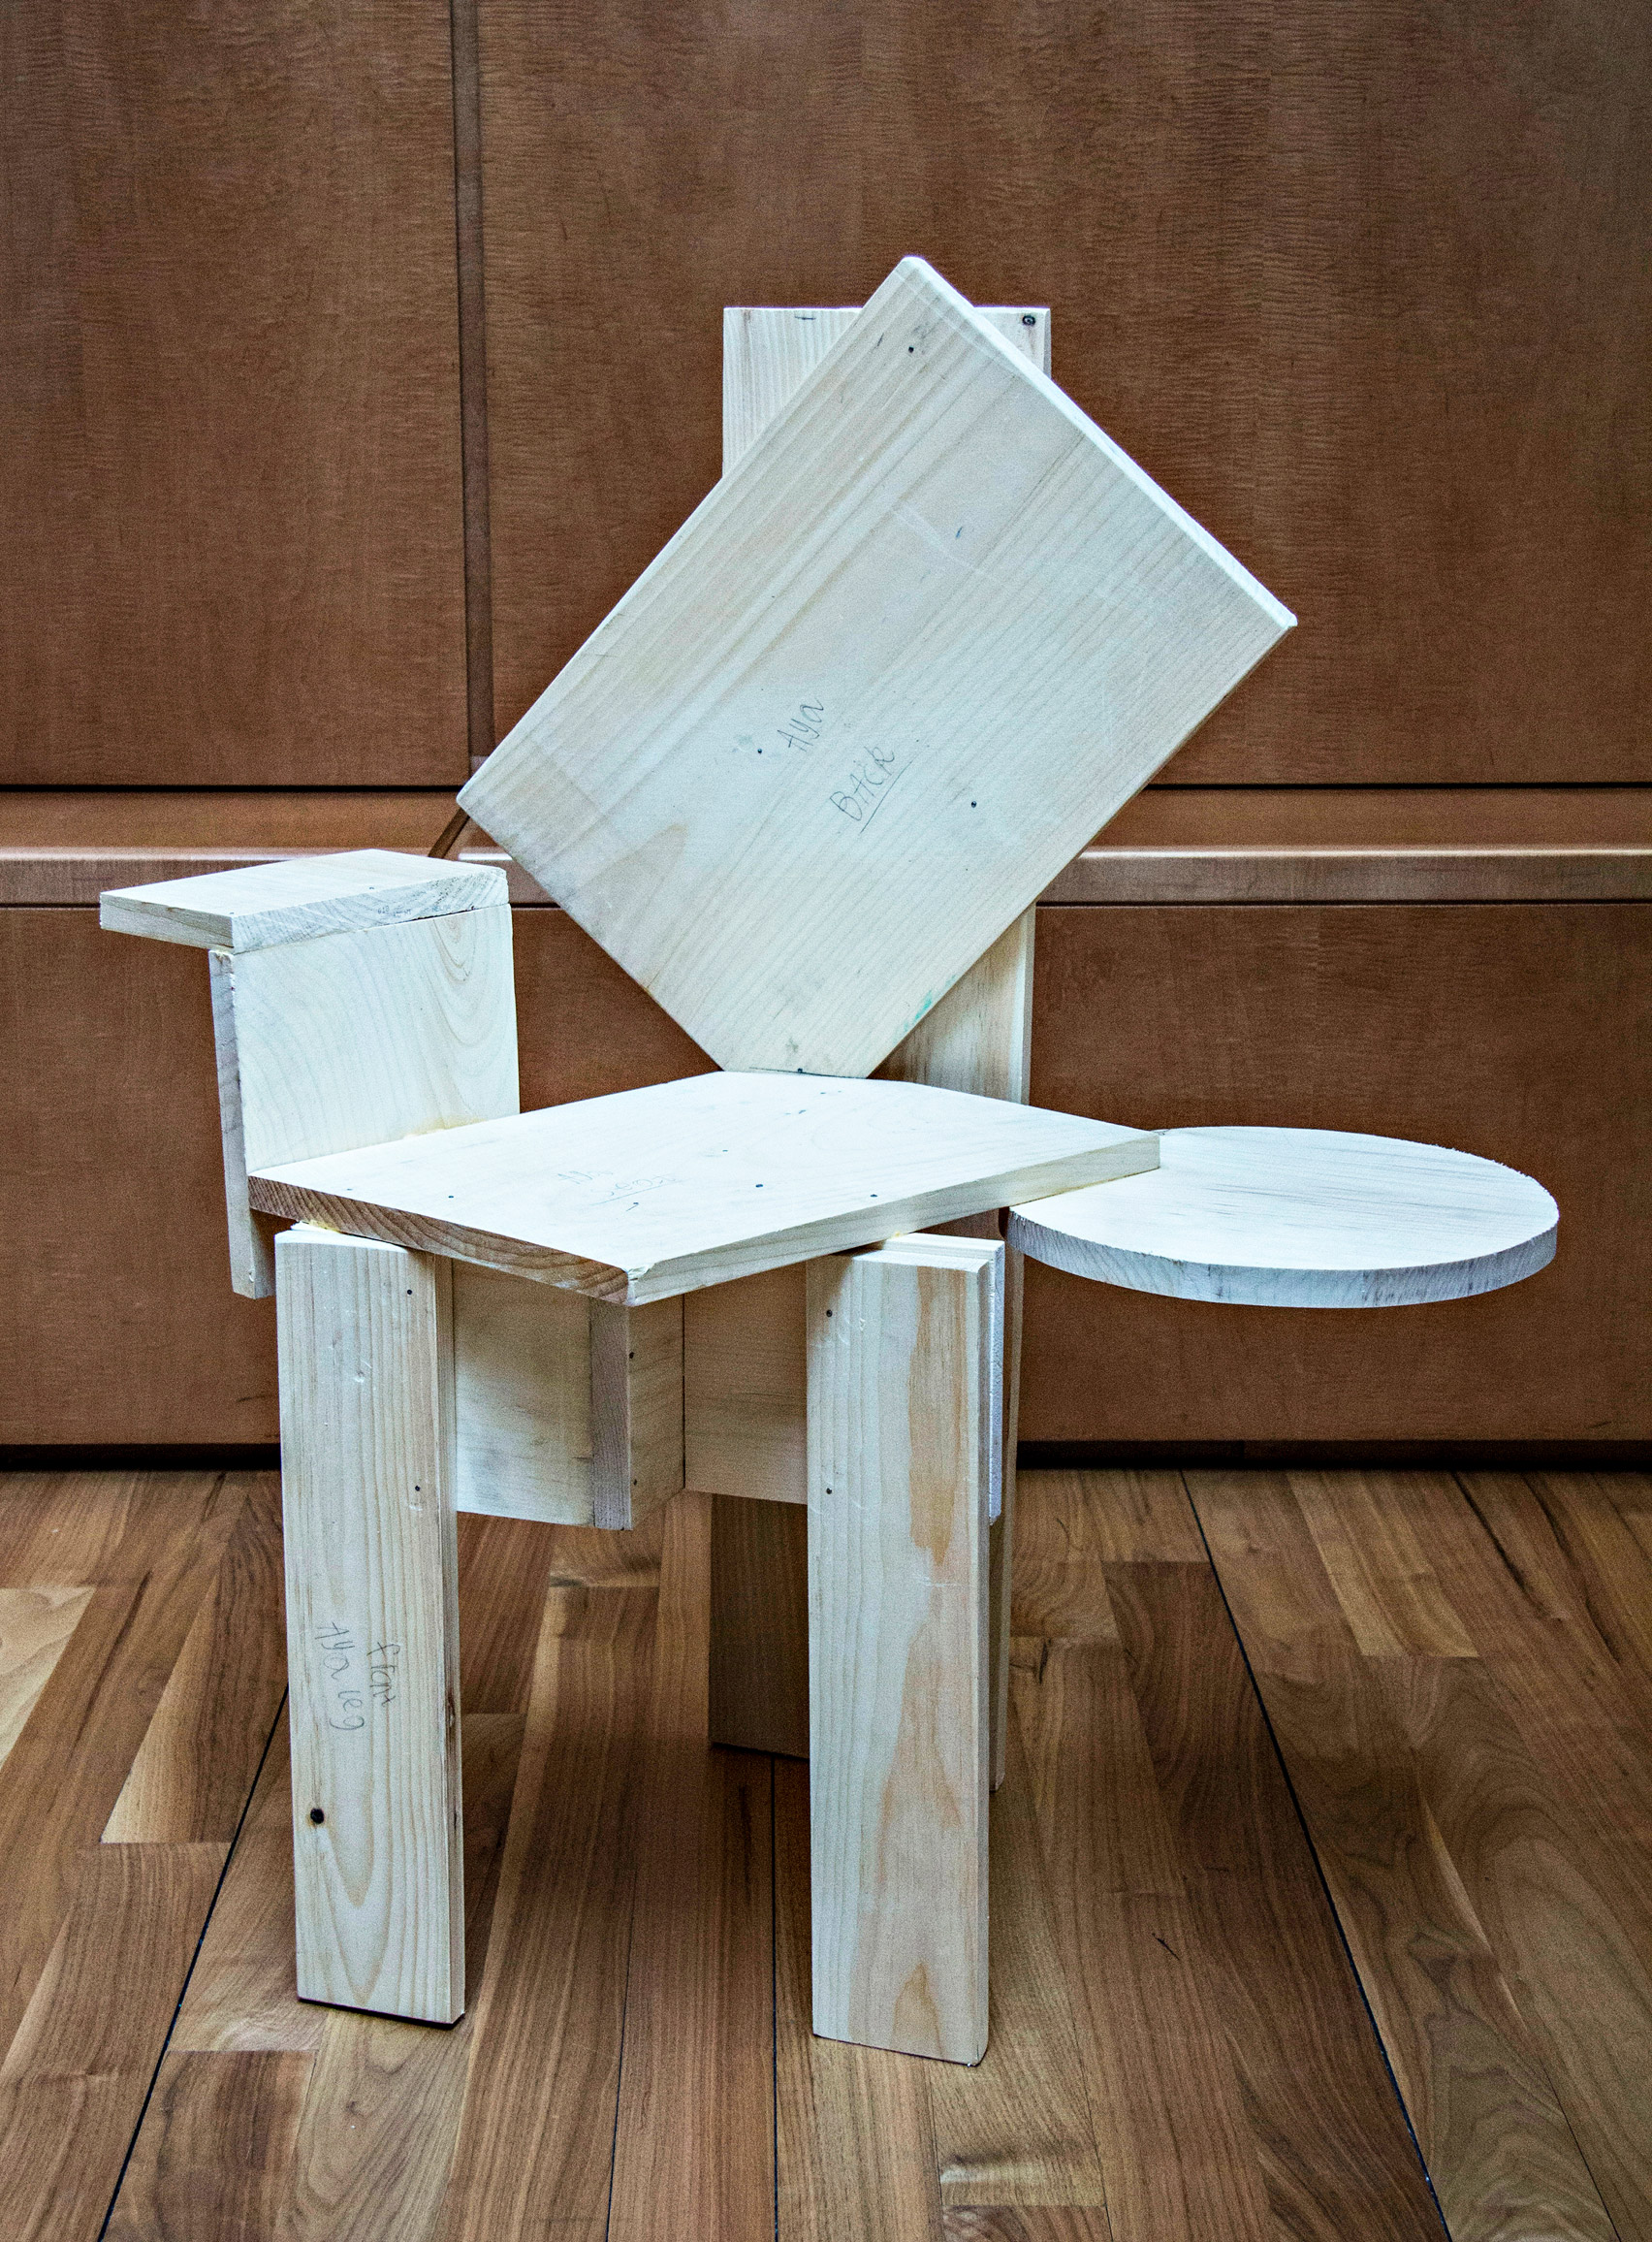 Unpainted, asymmetrical chair from Grade Three Chairs project by Bruce Edelstein at Trinity School